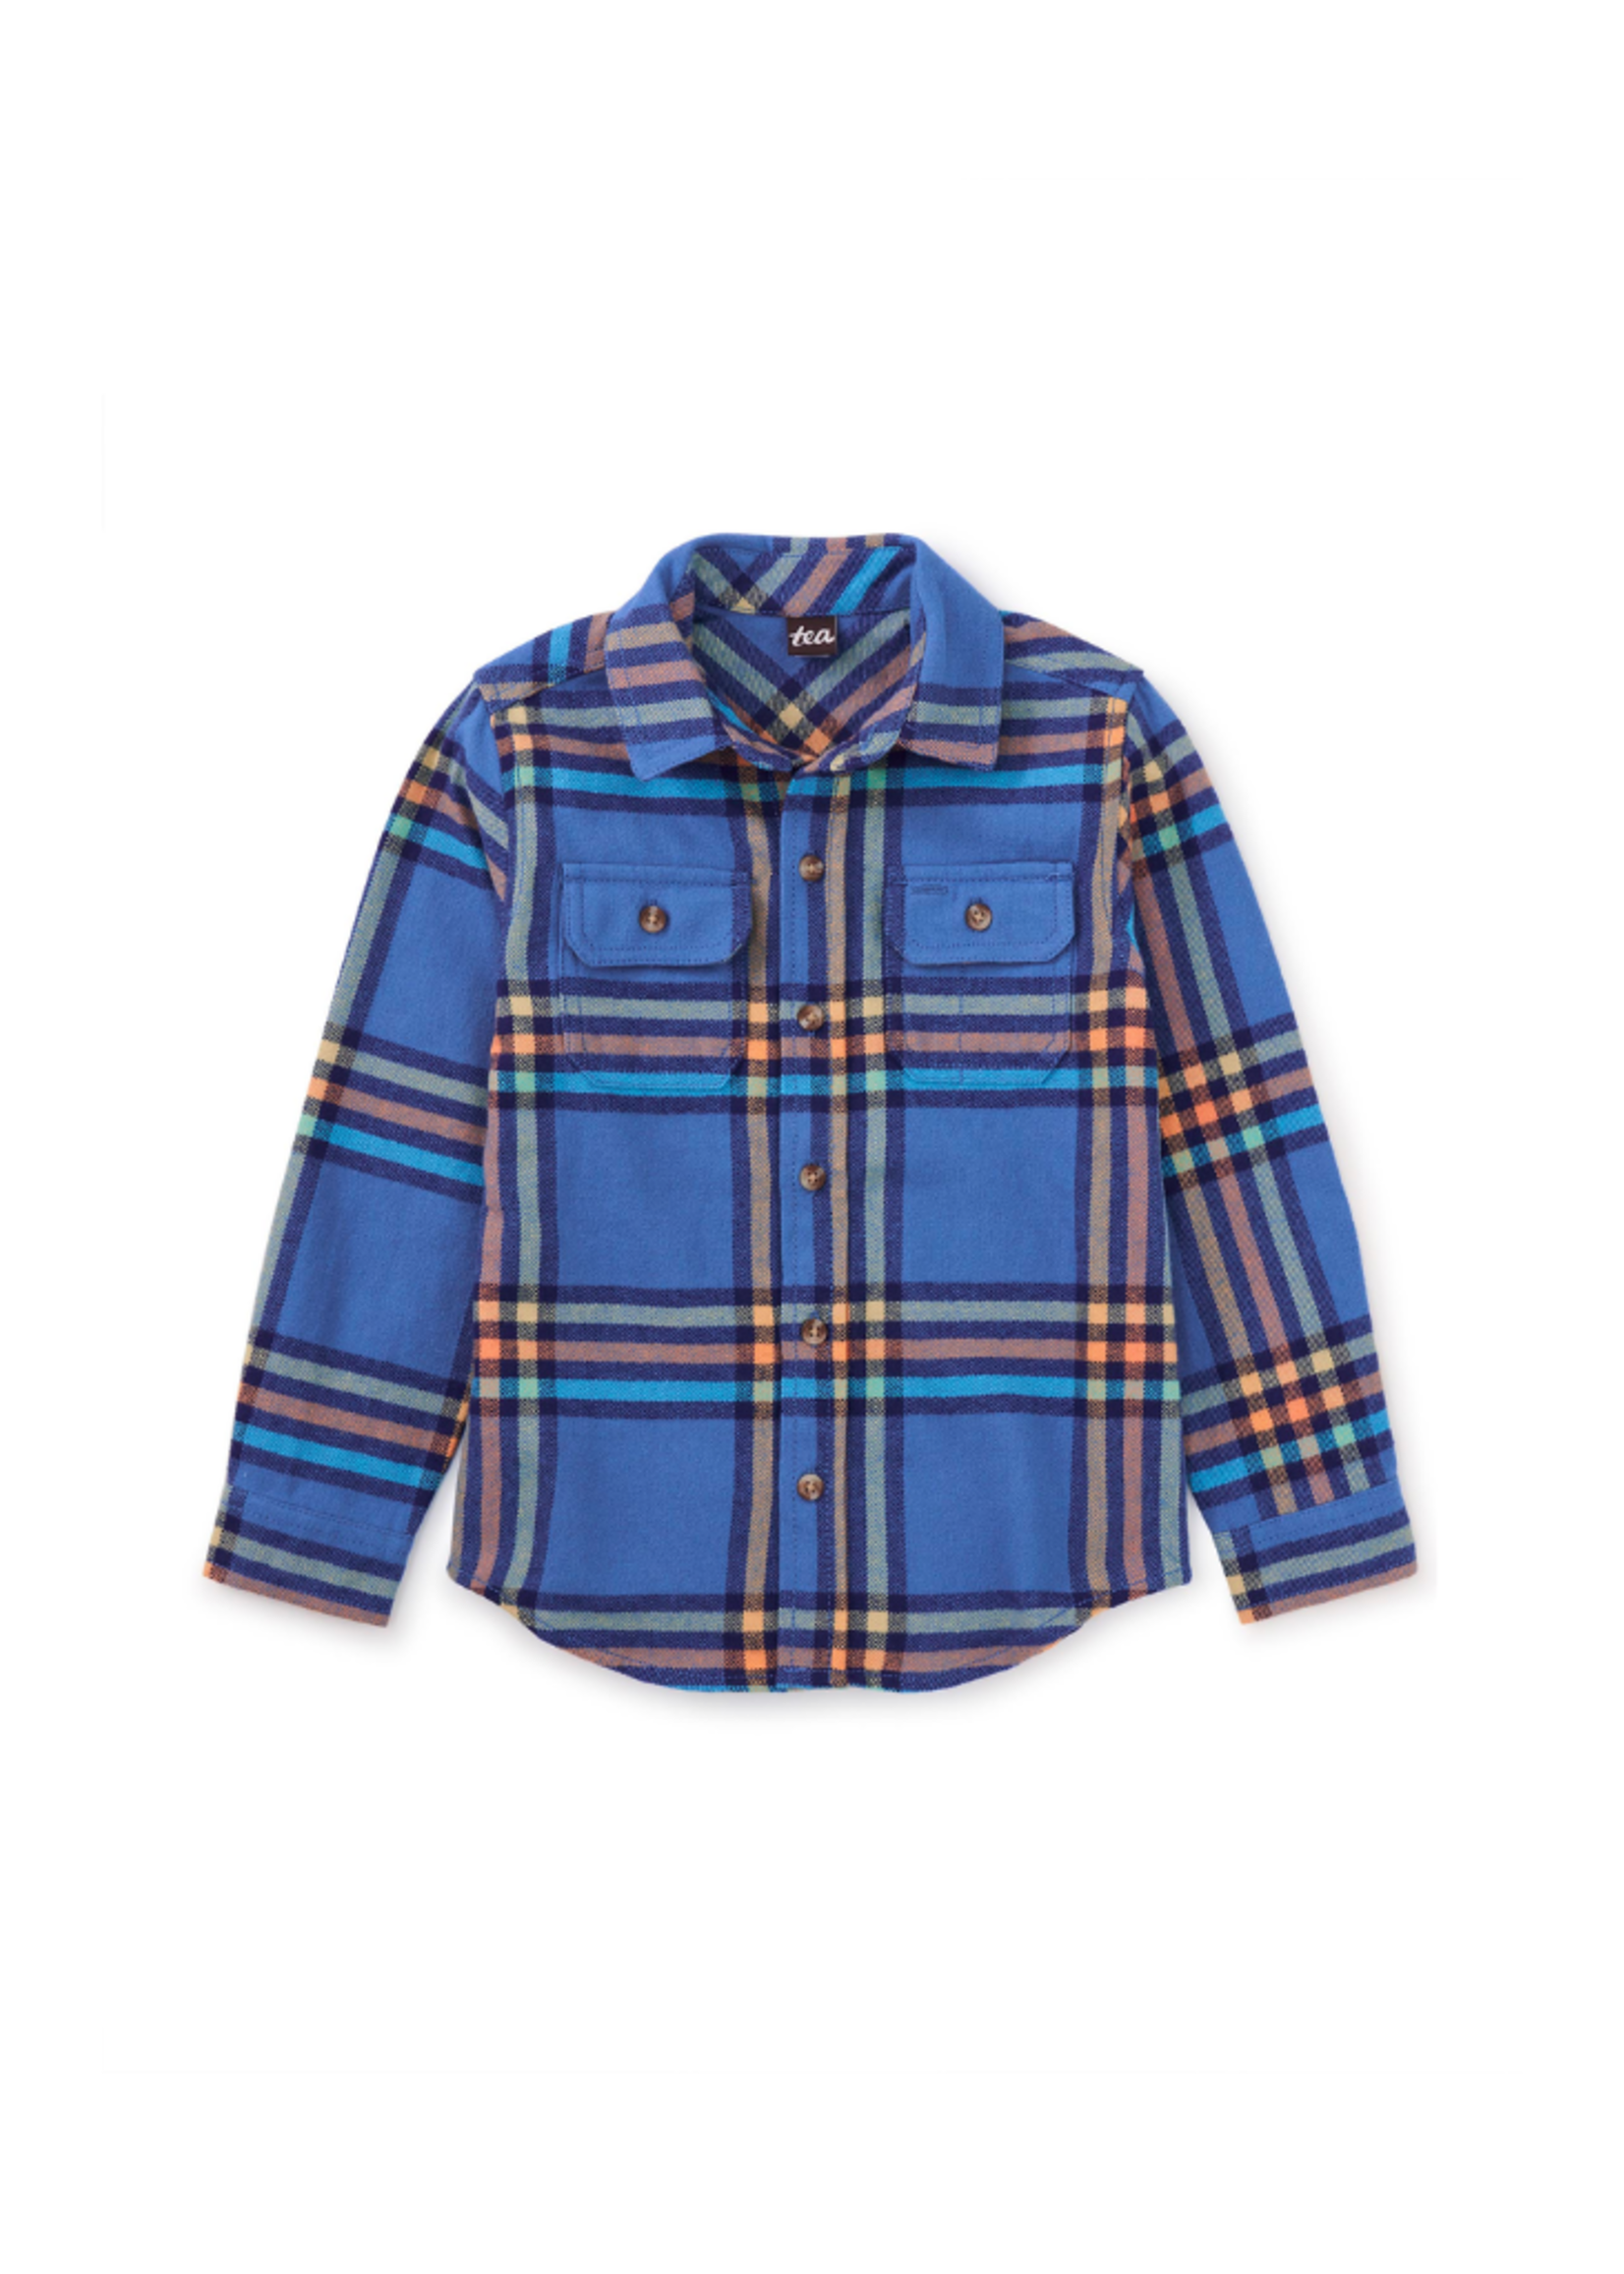 Tea Collection Flannel Button Up Shirt